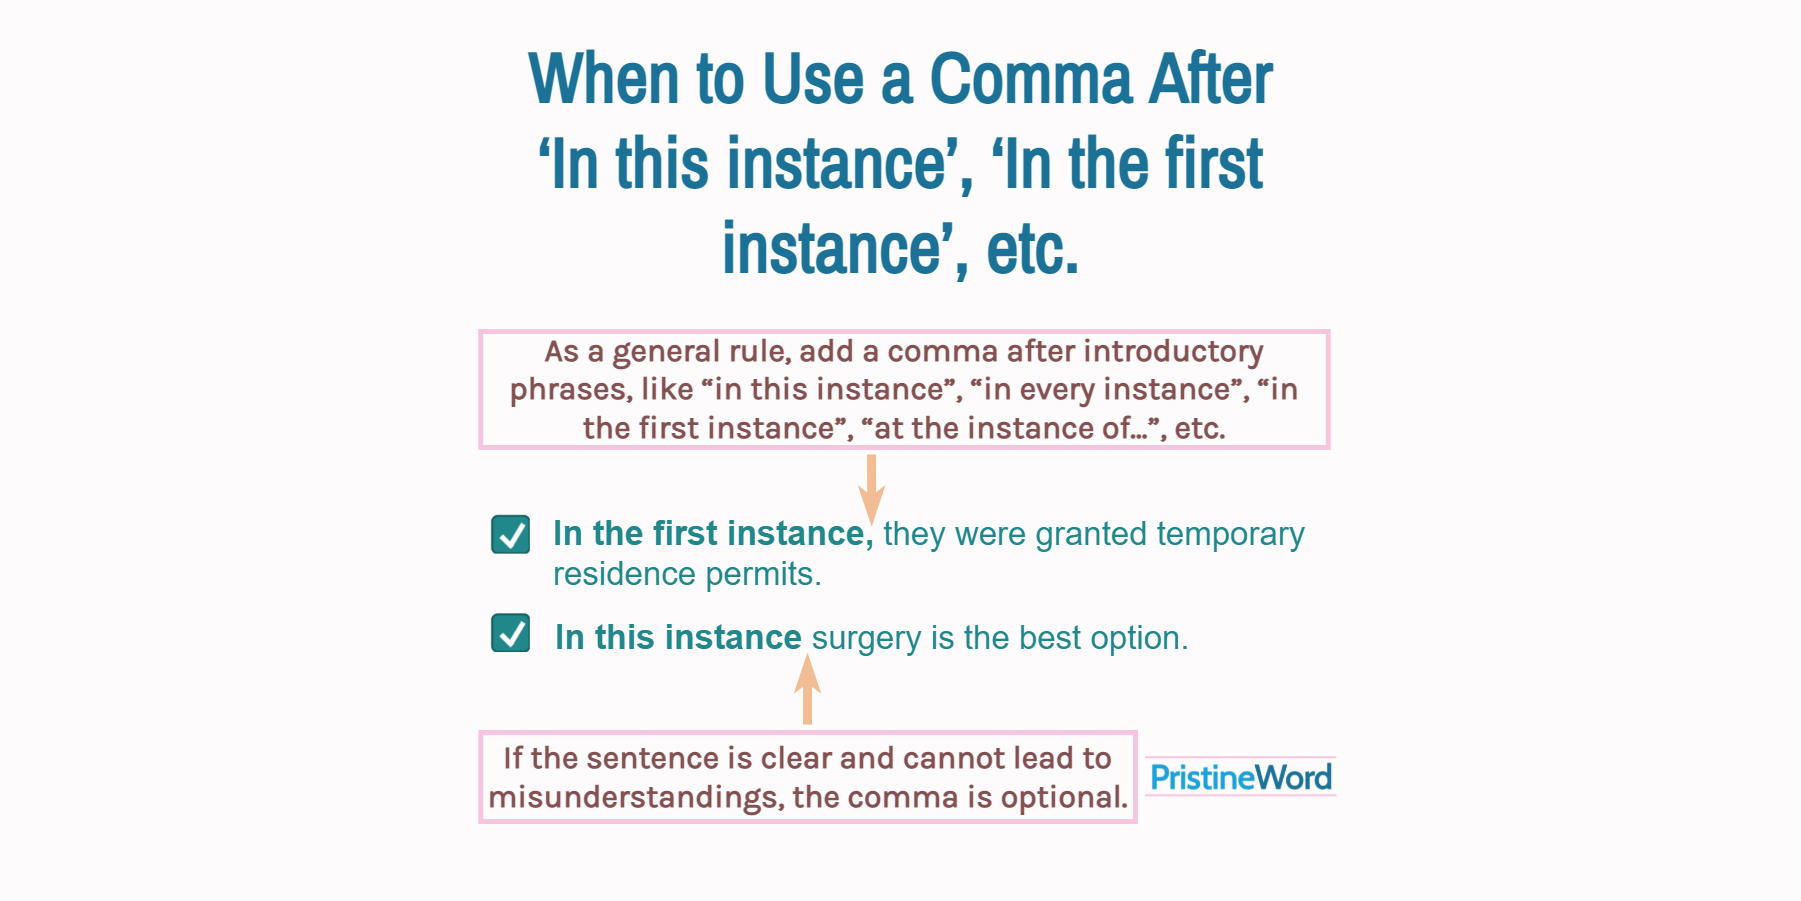 When to Use a Comma After ‘In this instance’, ‘In the first instance’, etc.